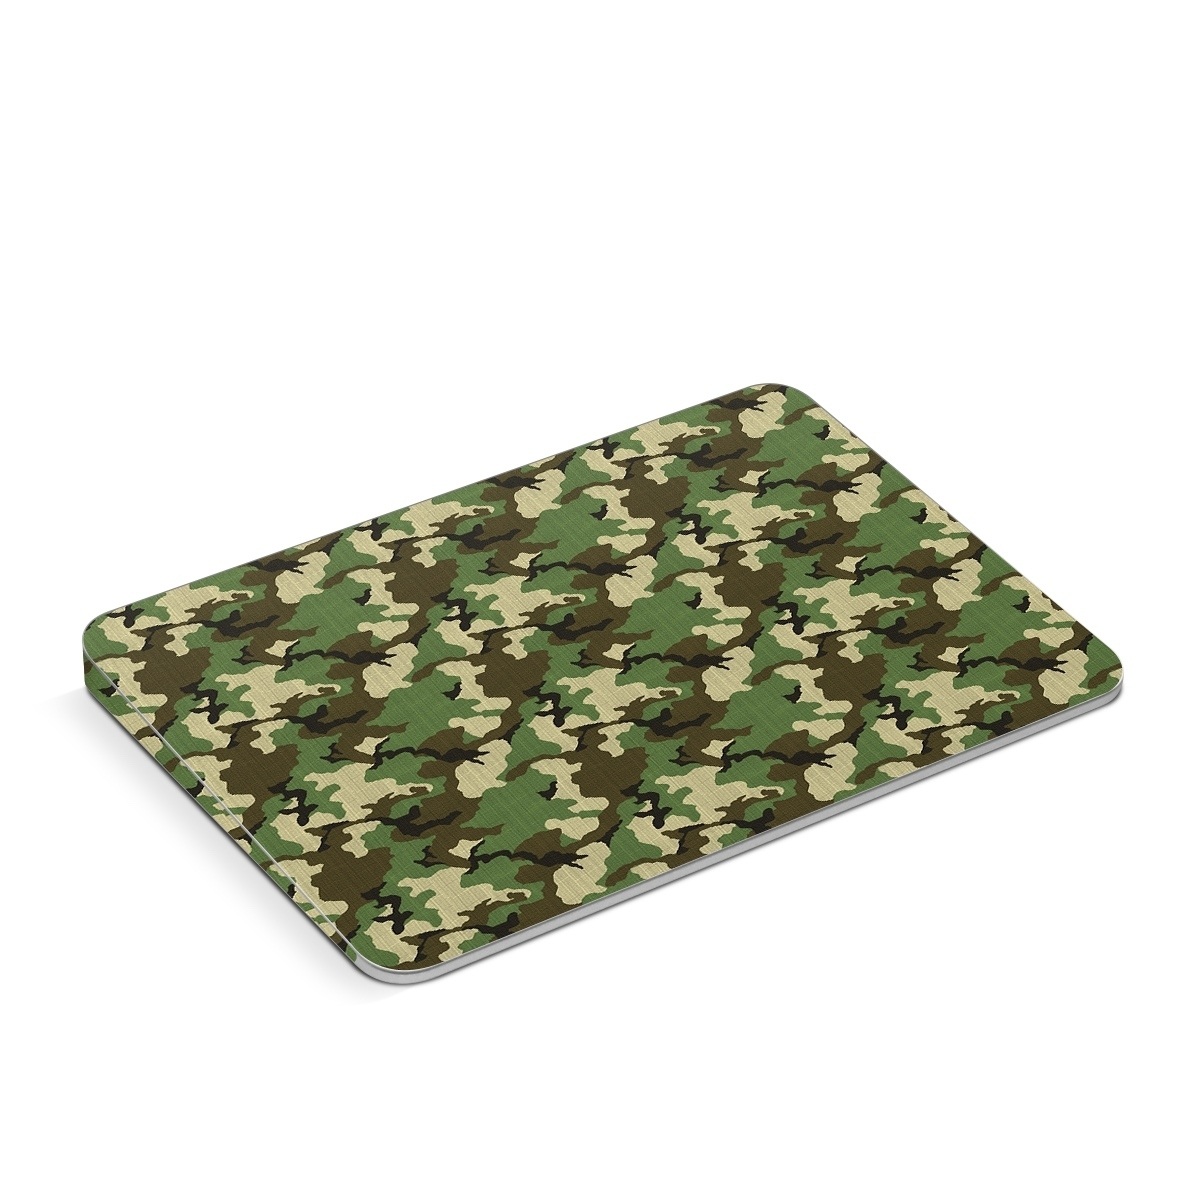 Apple Magic Trackpad Skin design of Military camouflage, Camouflage, Clothing, Pattern, Green, Uniform, Military uniform, Design, Sportswear, Plane, with black, gray, green colors